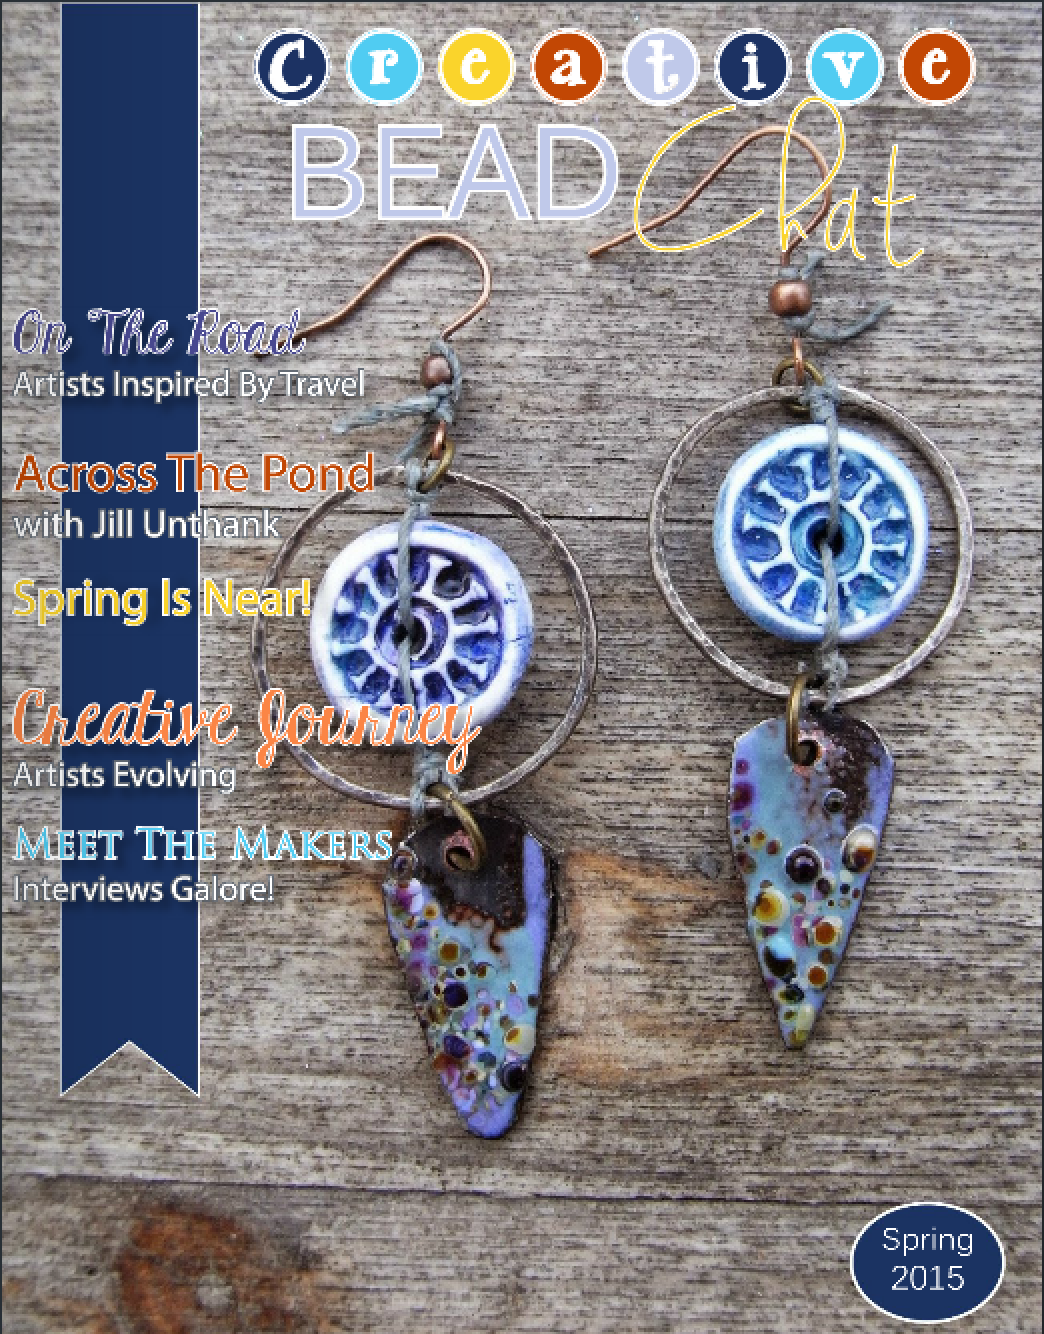 Cover - Spring 2015 issue, Bead Chat magazine